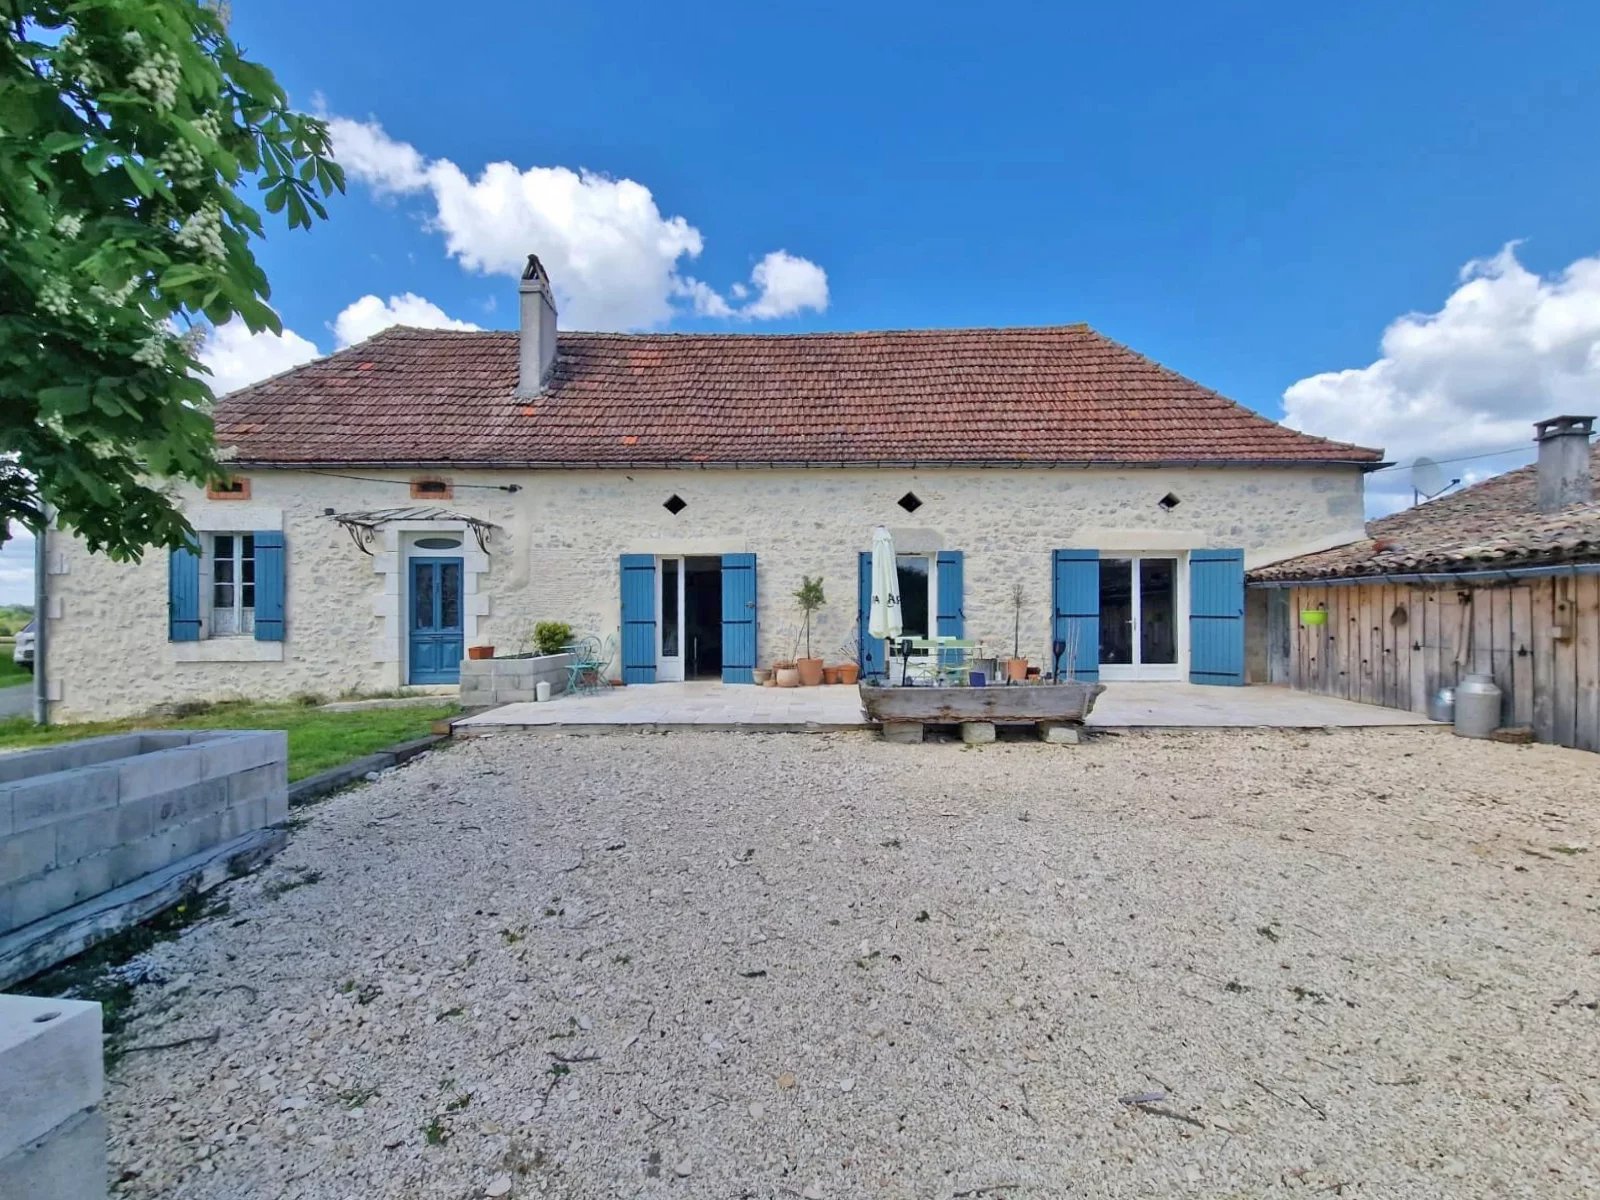 3 bedroom stone farmhouse with views